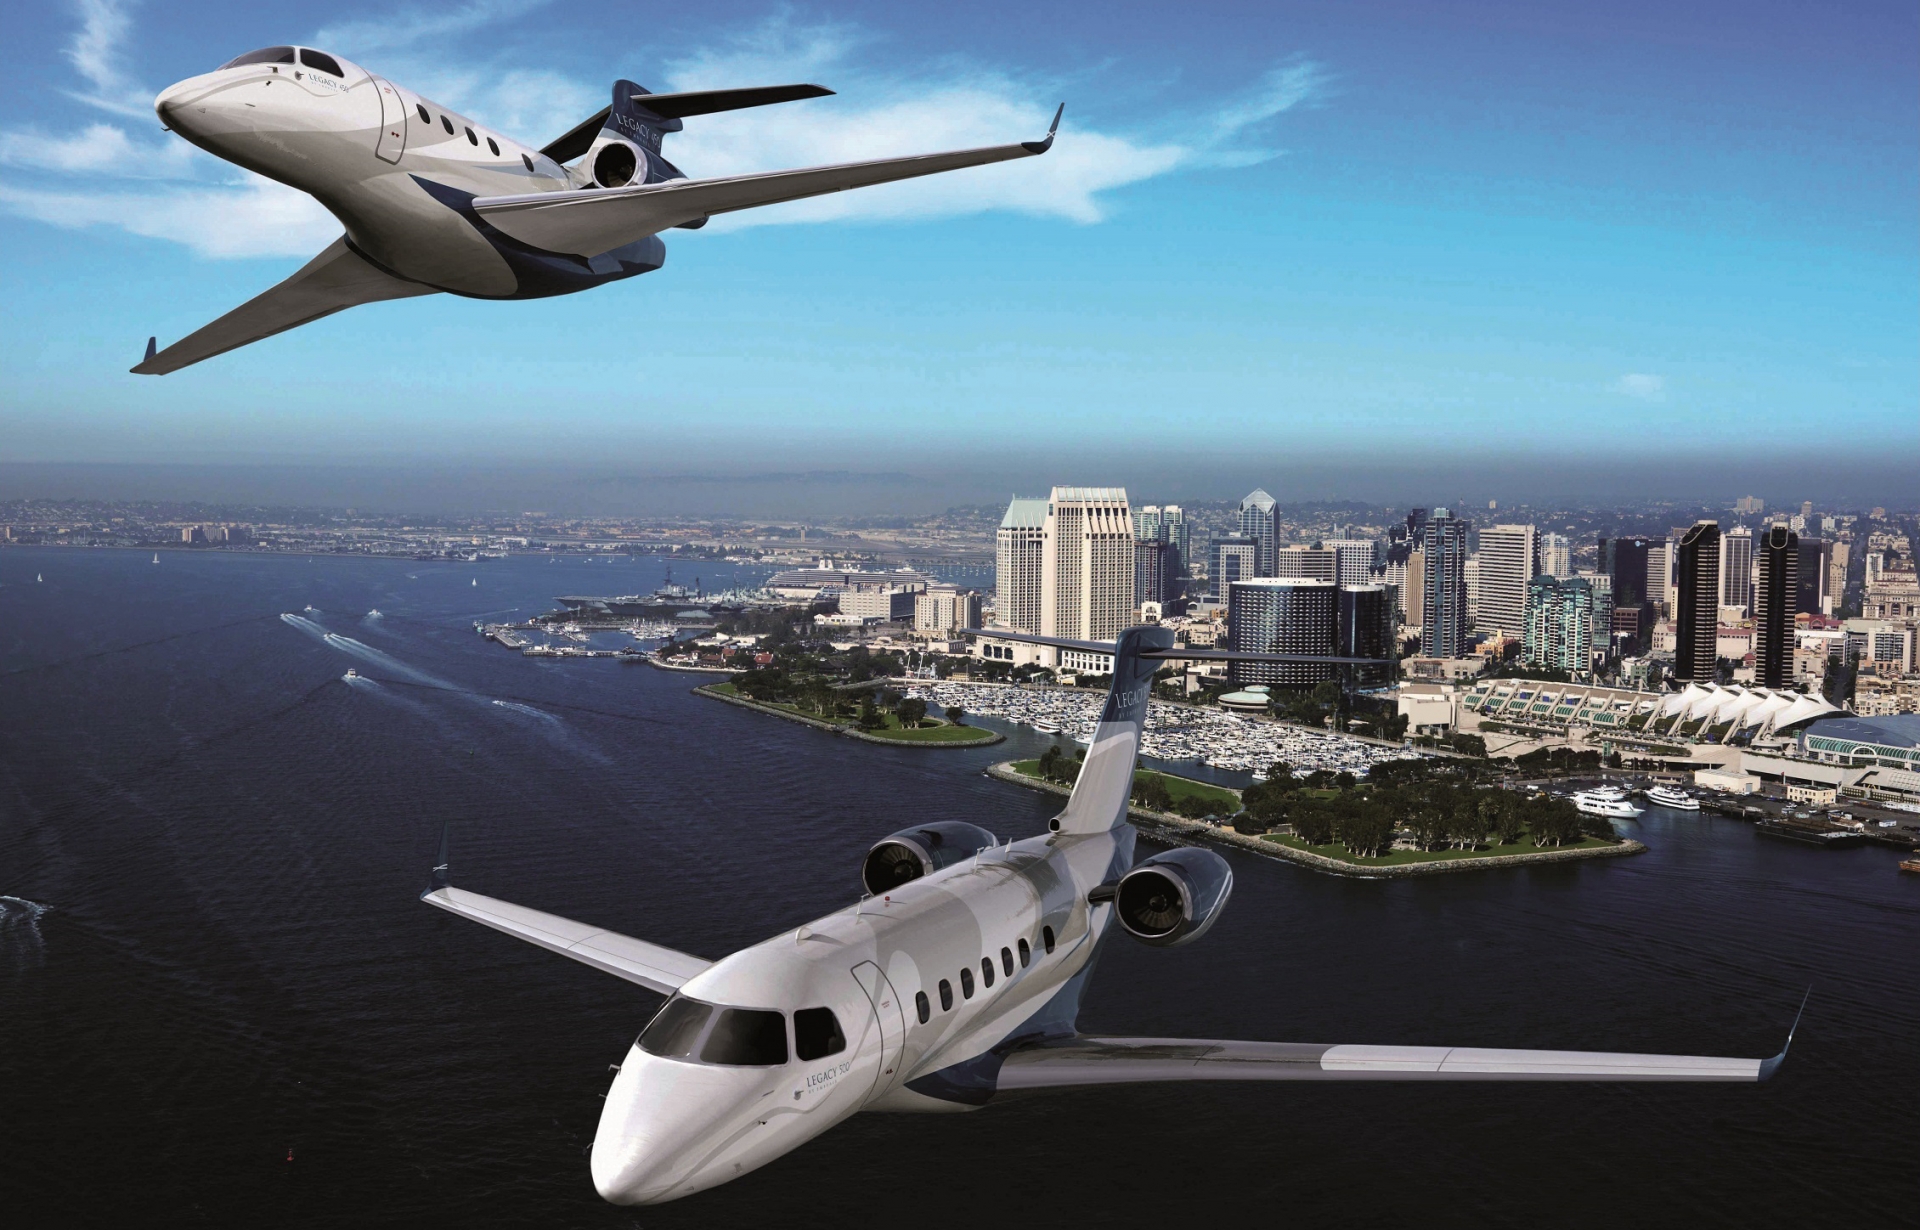 Embraer has been recognized with numerous awards for its innovations and design additions to the world of aviation.